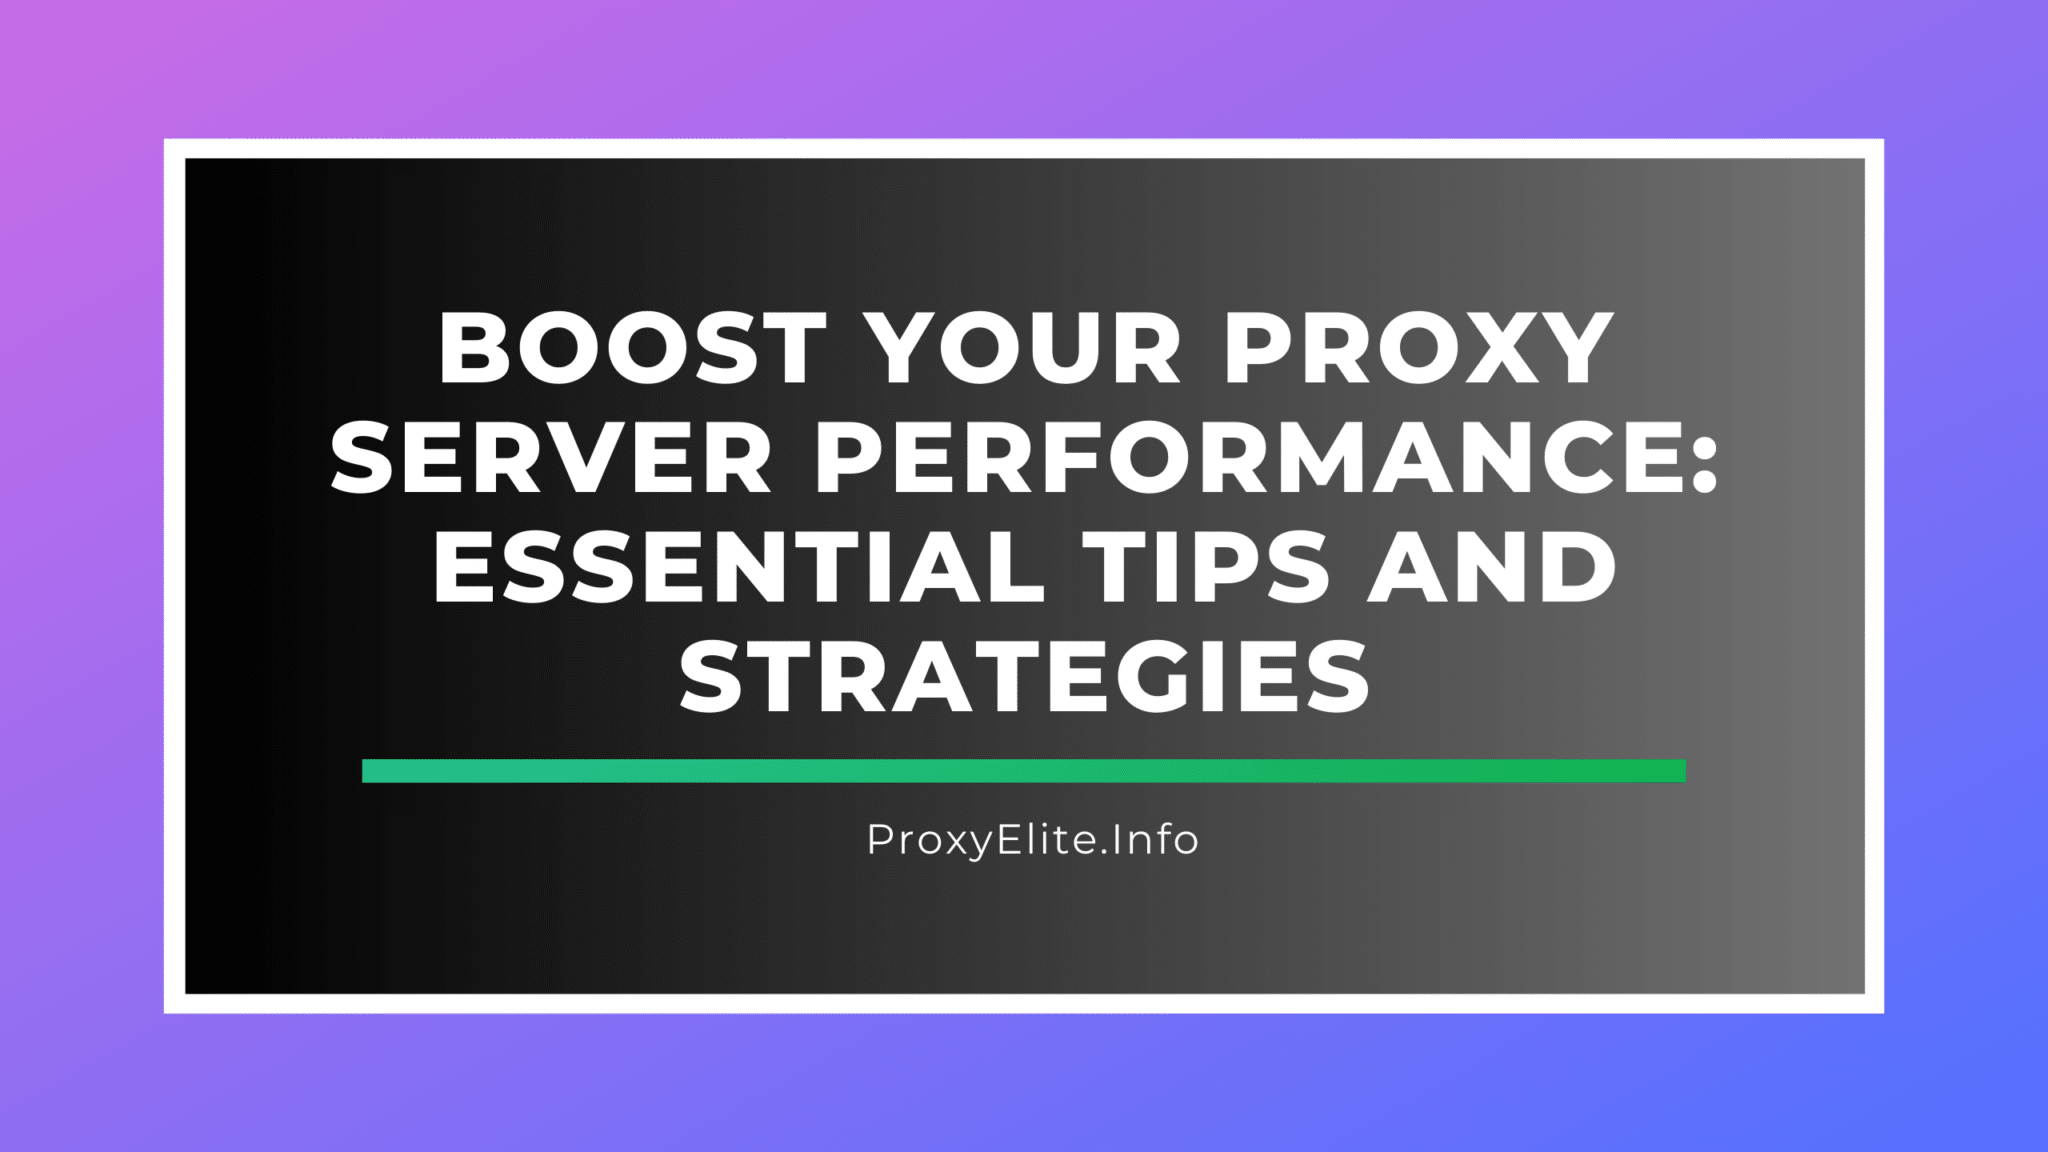 Boost Your Proxy Server Performance: Essential Tips and Strategies